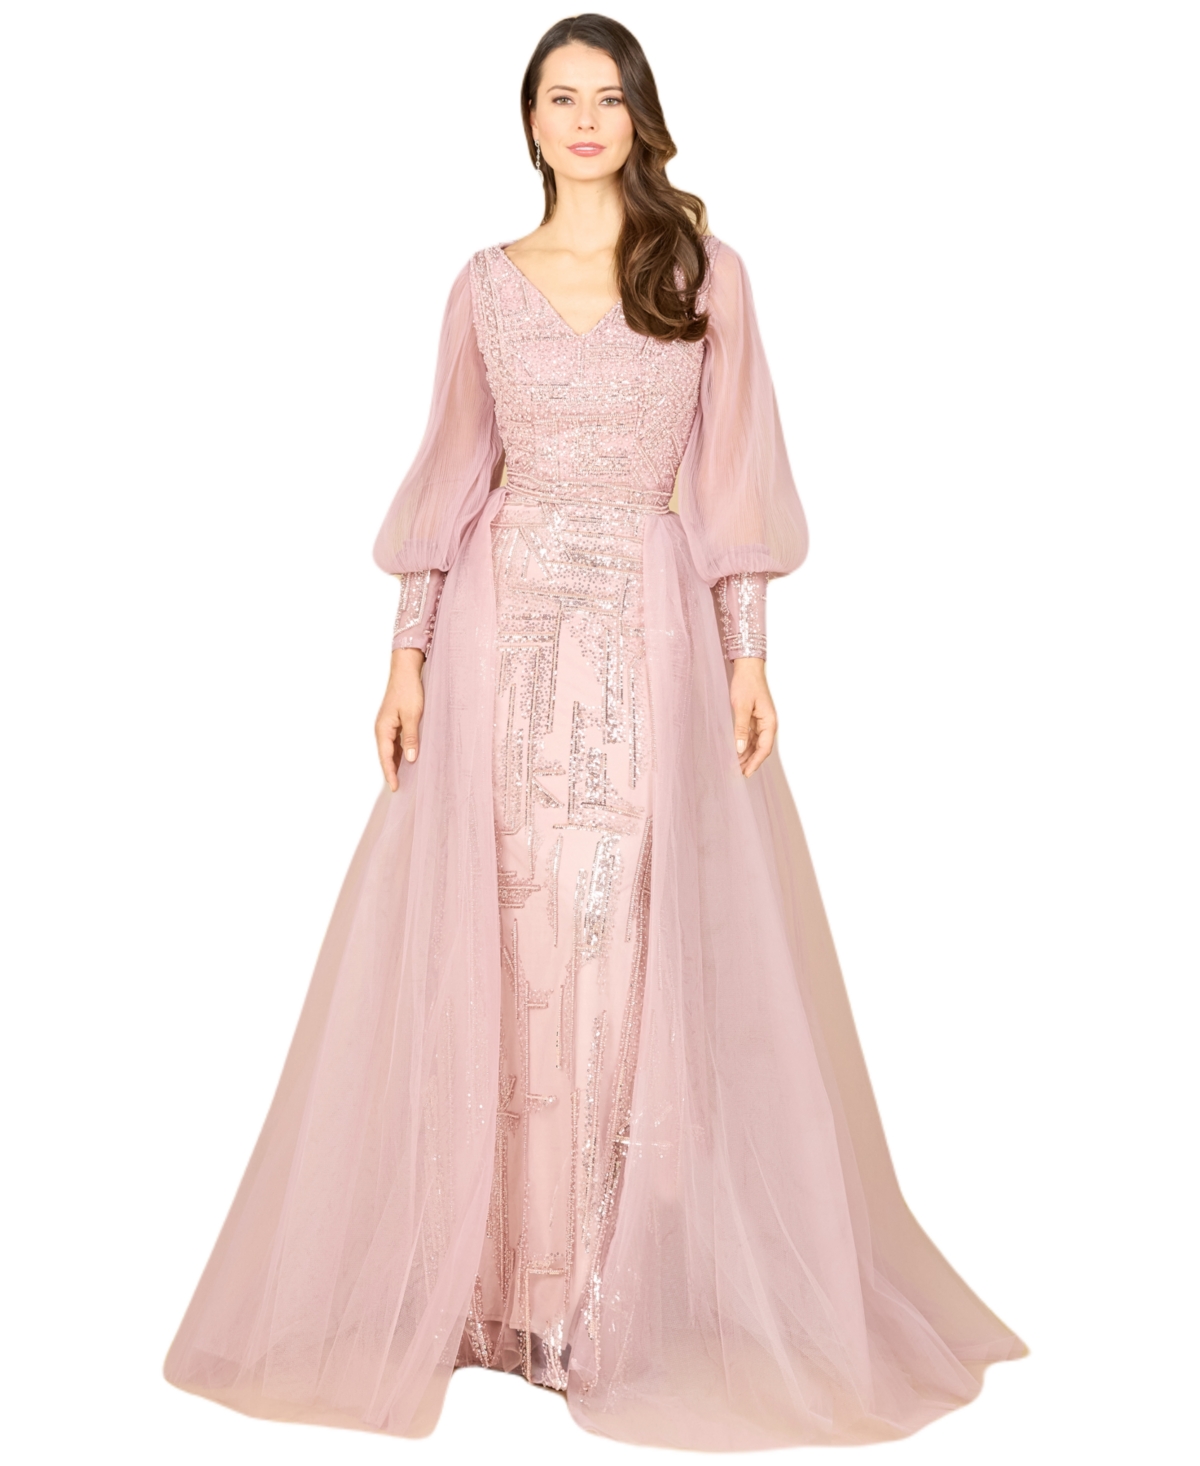 Women's Long Sleeve Lace Gown with Removable Over Skirt - Mauve